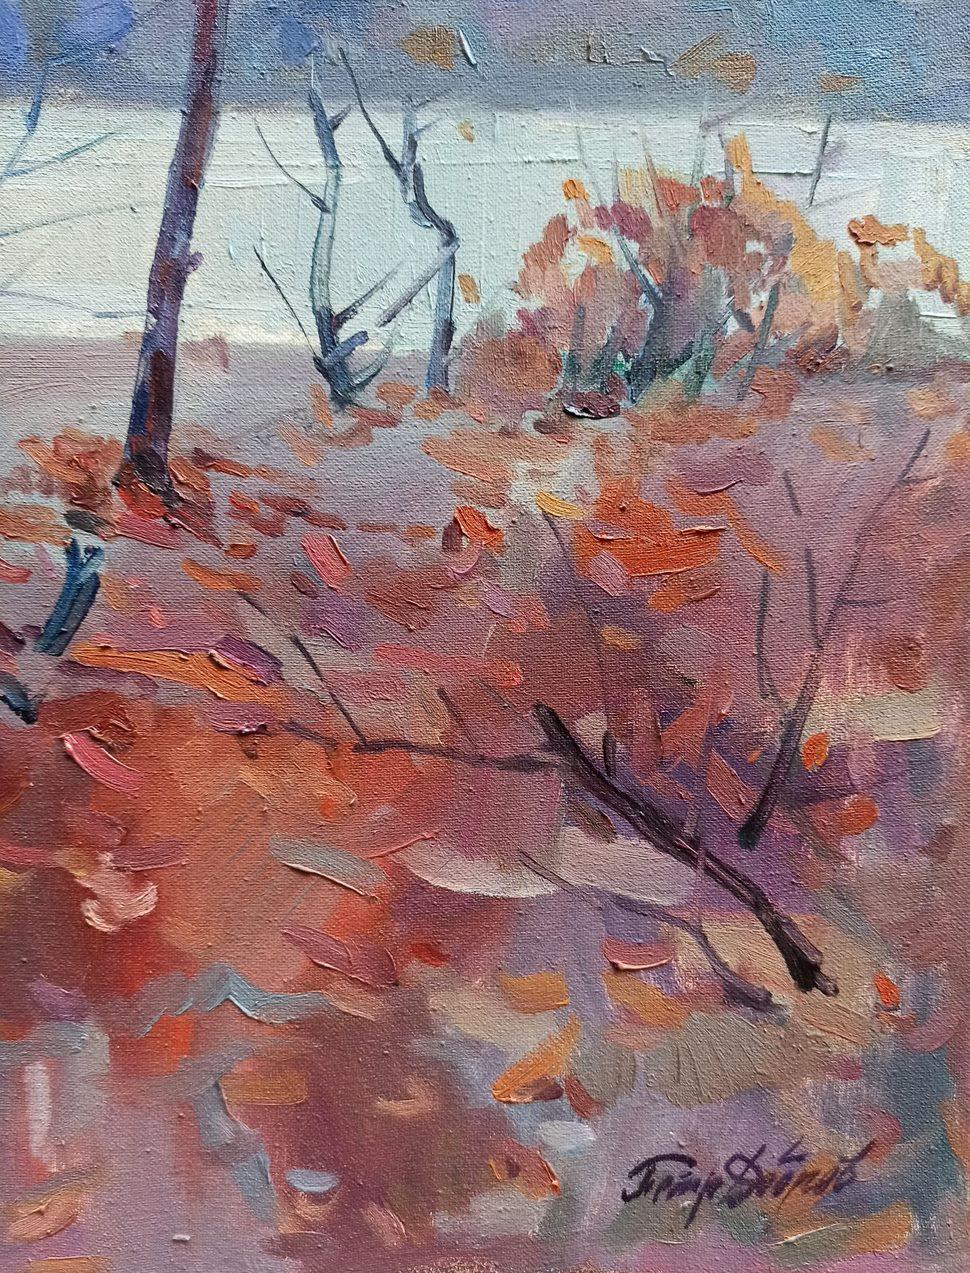 Artist: Peter Tovpev
Work: Original oil painting, handmade artwork, one of a kind 
Medium: Oil on Canvas 
Year: 2013
Style: Impressionism
Title: Autumn Landscape
Size: 27.5